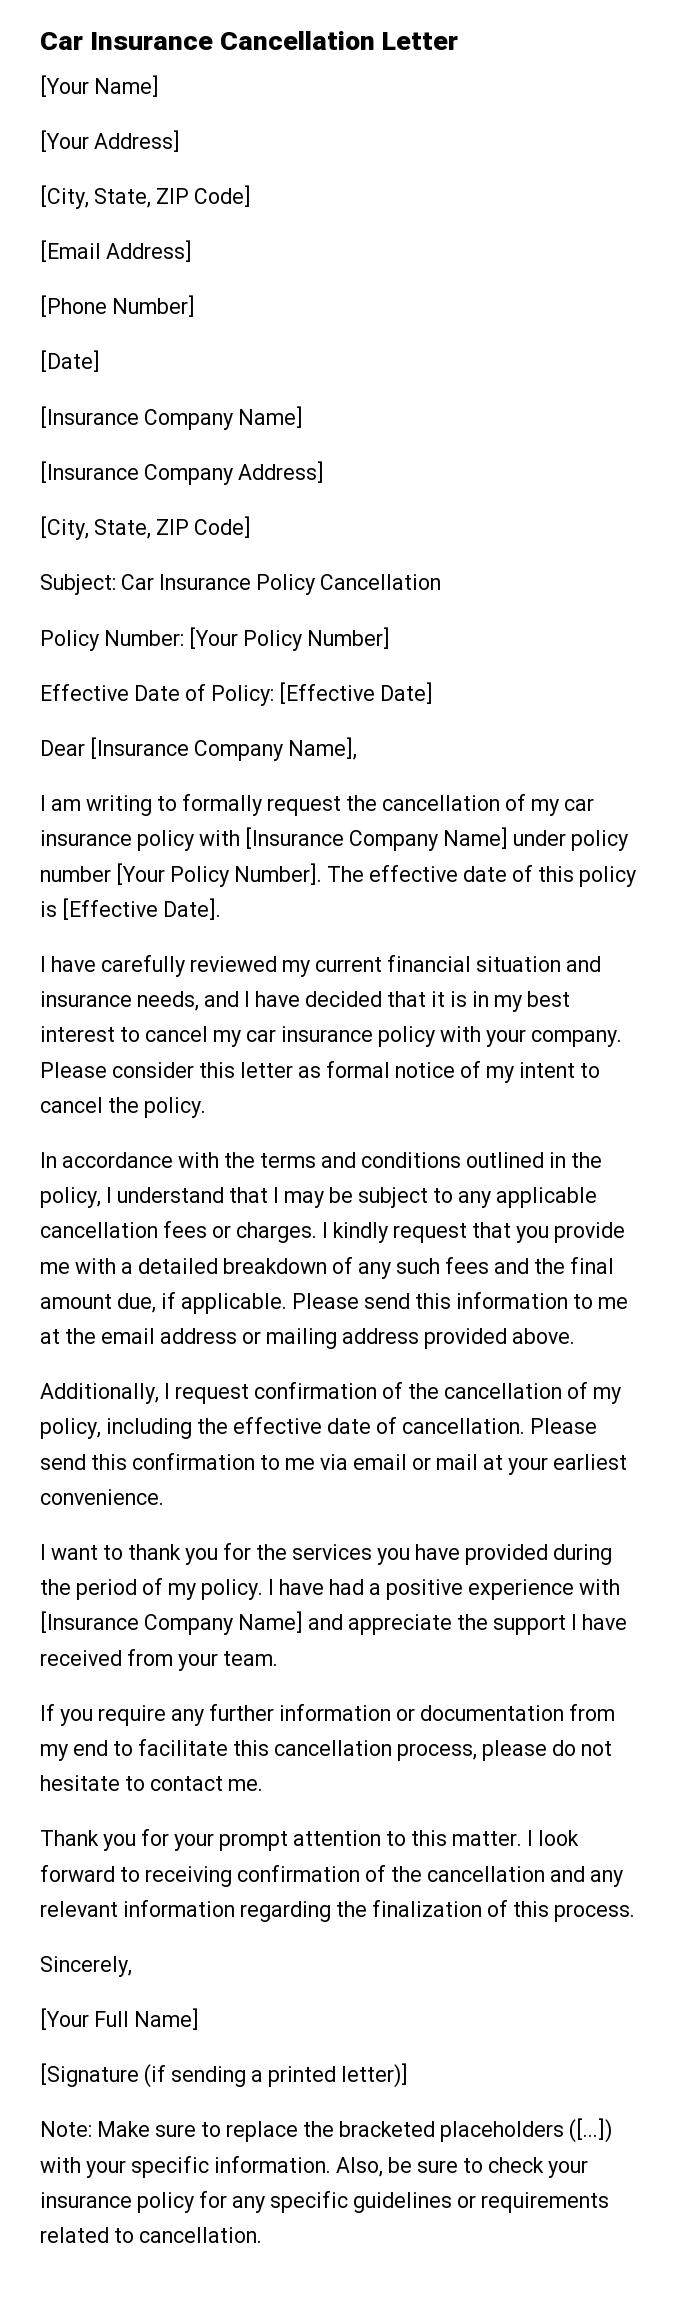 Car Insurance Cancellation Letter